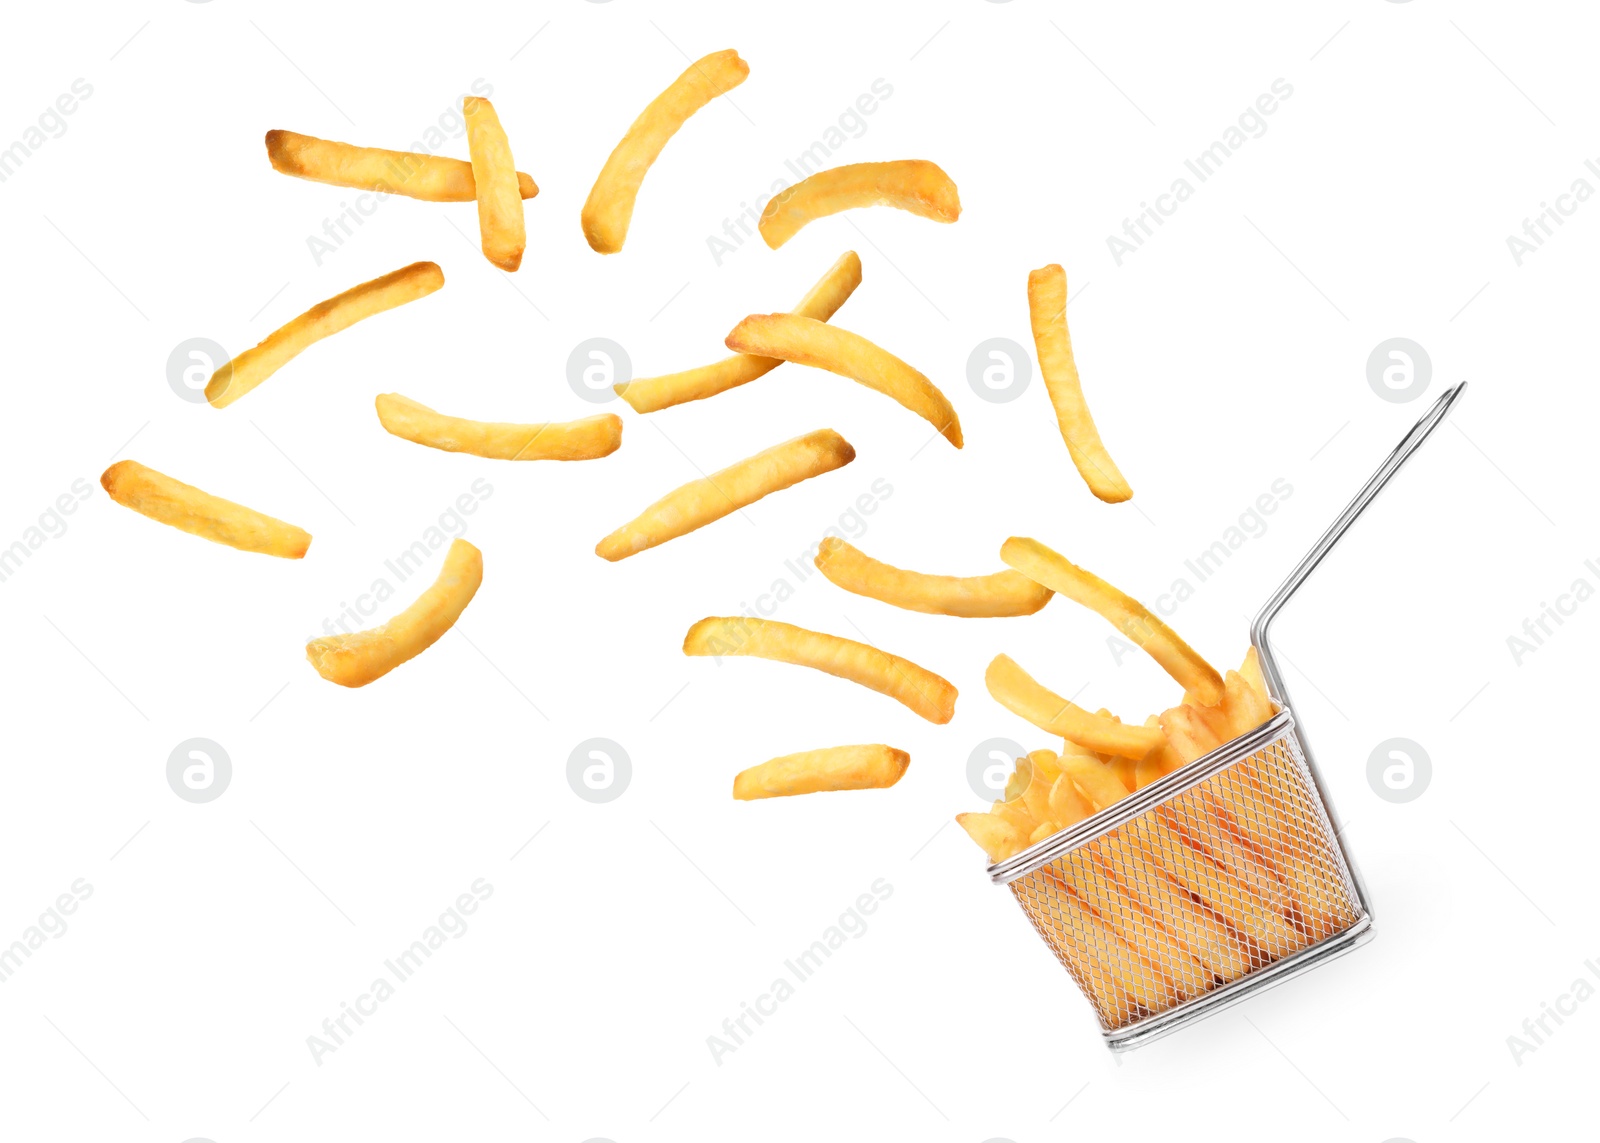 Image of Metal basket and flying tasty French fries on white background